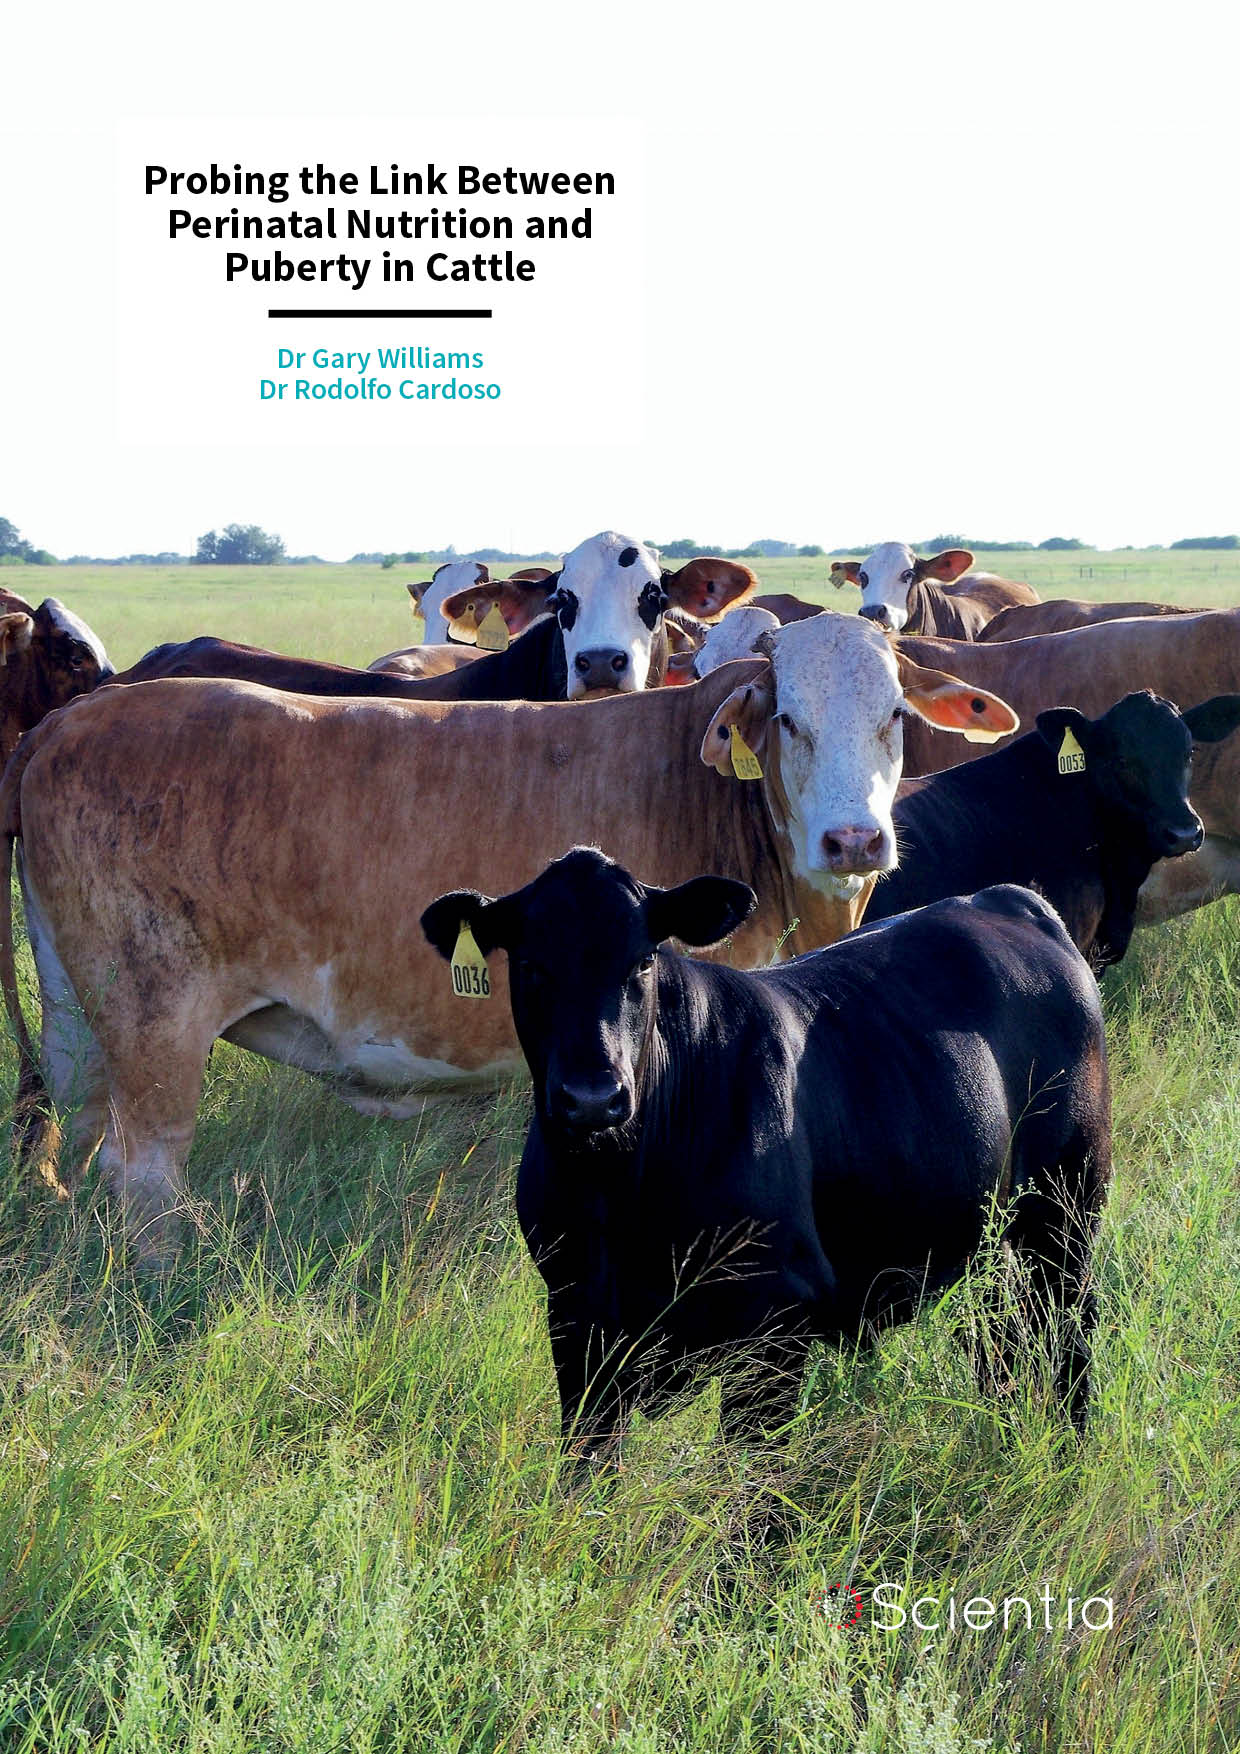 Dr Gary Williams | Dr Rodolfo Cardoso – Probing the Link Between Perinatal Nutrition and Puberty in Cattle